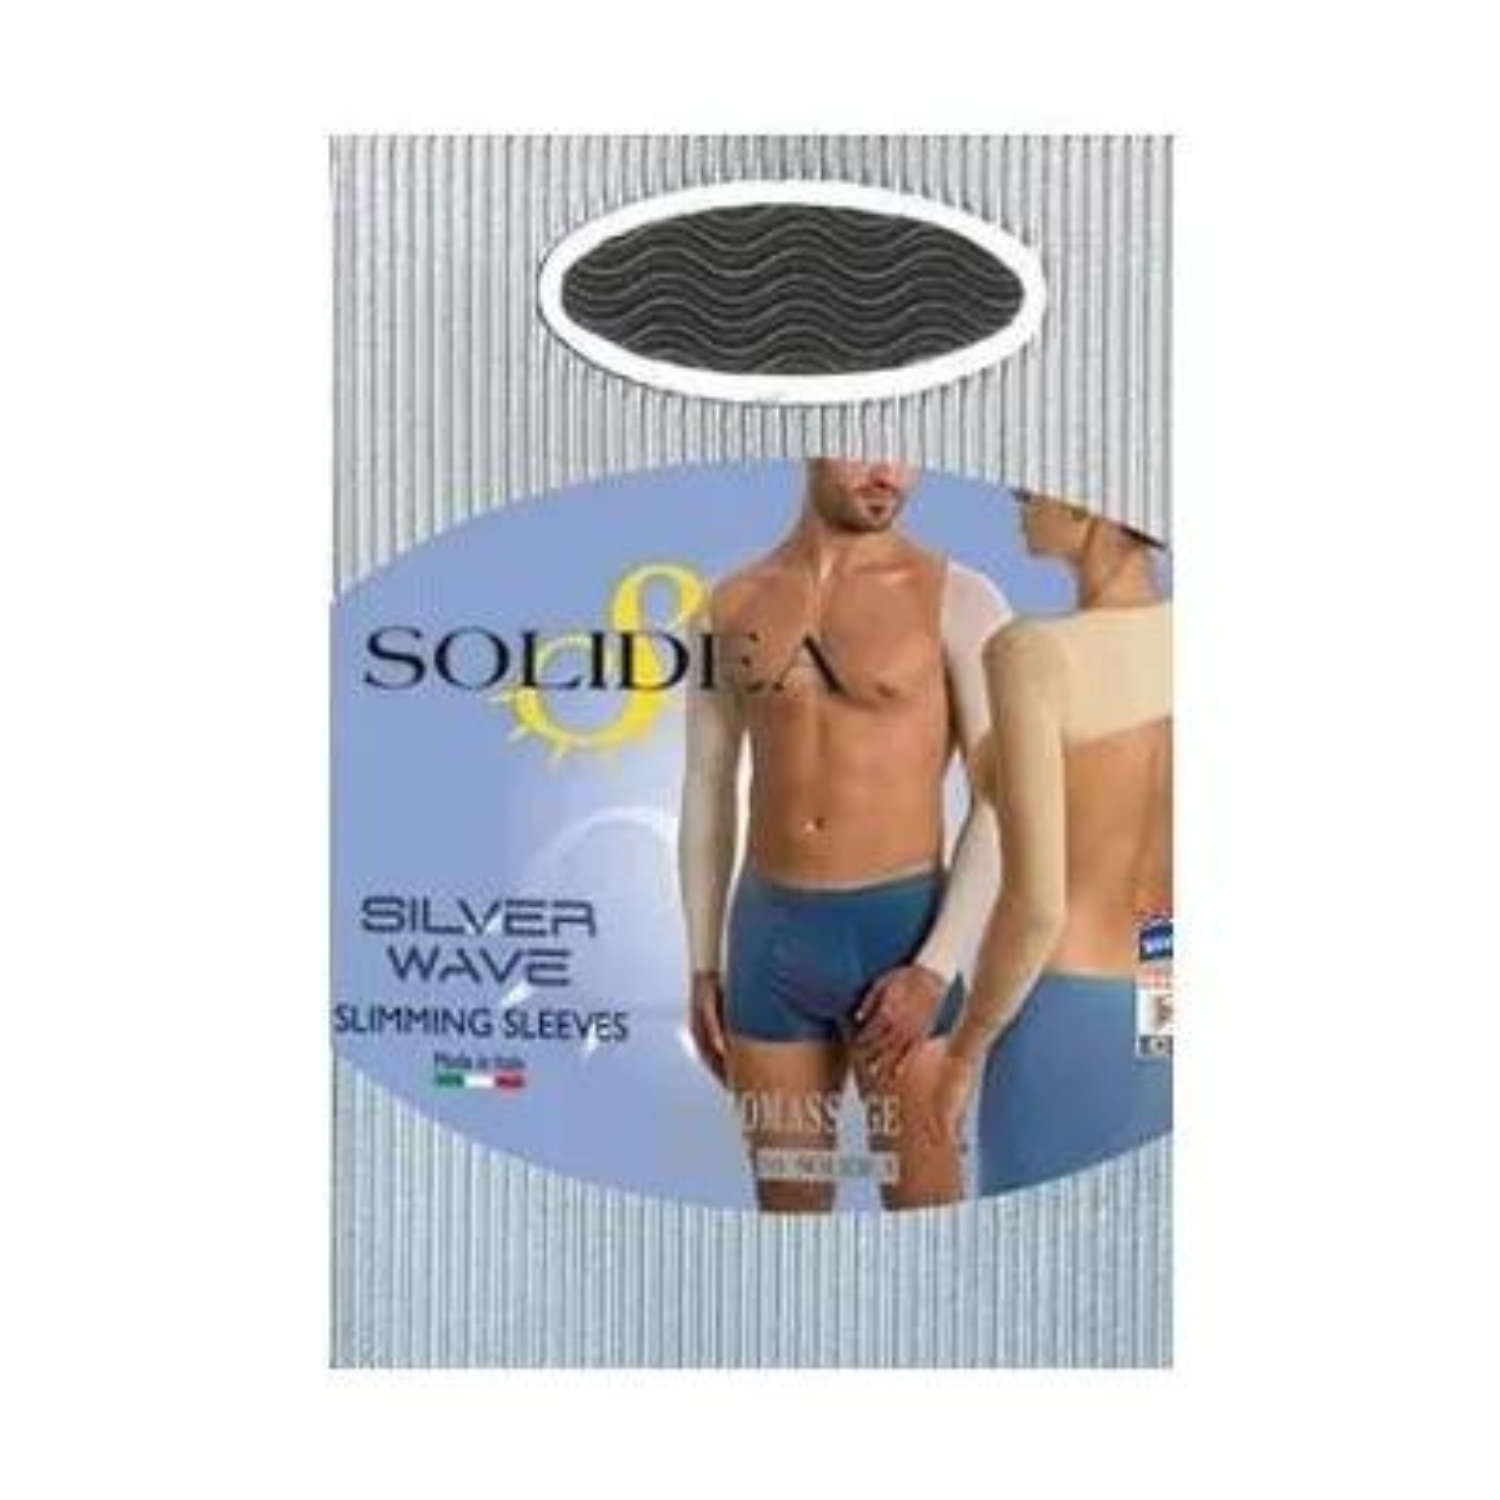 Solidea Silver Wave Slimming Sleeves Maneci 2M Noisette